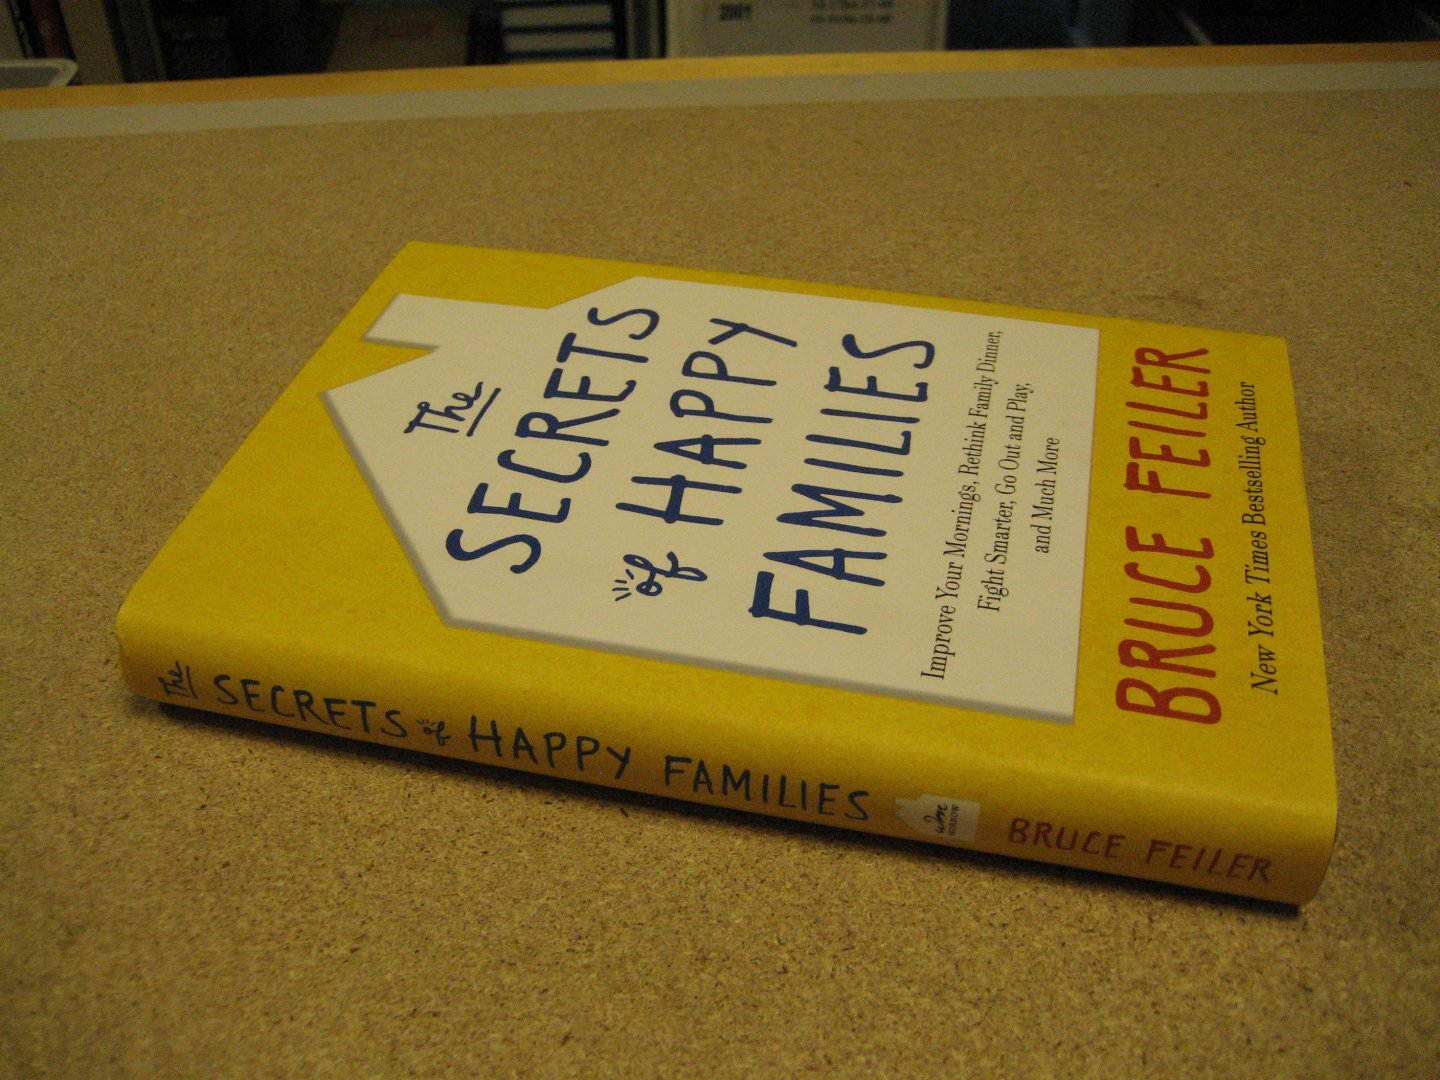 Feiler, Bruce - The Secrets of Happy Families.  Improve Your Mornings, Rethink Family Dinner, Fight Smarter, Go Out and Play, and Much More